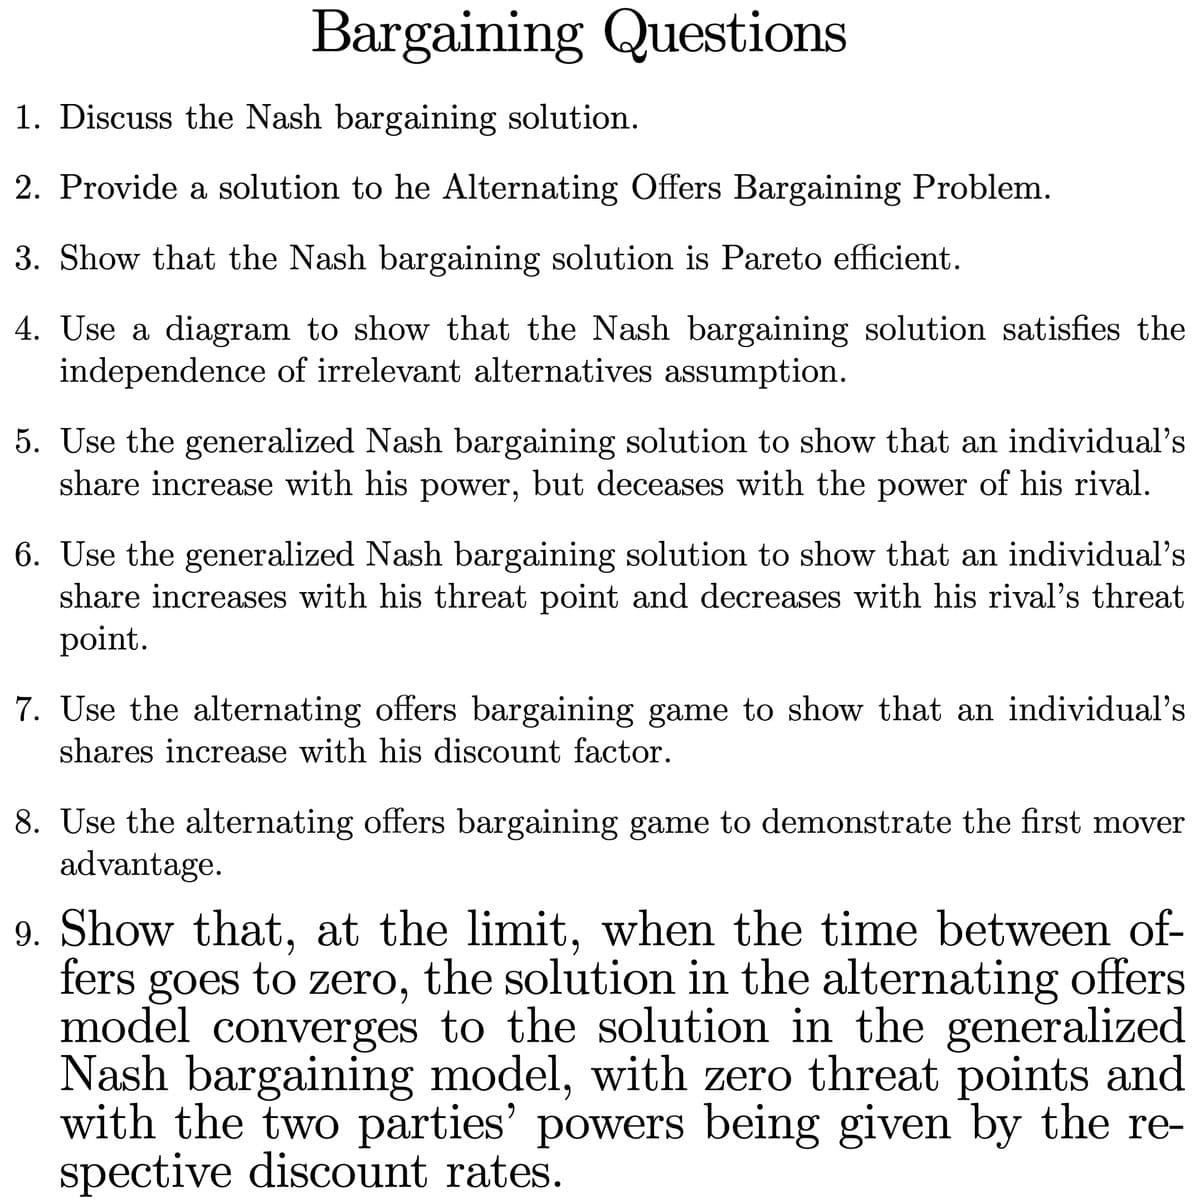 Bargaining Questions
1. Discuss the Nash bargaining solution.
2. Provide a solution to he Alternating Offers Bargaining Problem.
3. Show that the Nash bargaining solution is Pareto efficient.
4. Use a diagram to show that the Nash bargaining solution satisfies the
independence of irrelevant alternatives assumption.
5. Use the generalized Nash bargaining solution to show that an individual's
share increase with his power, but deceases with the power of his rival.
6. Use the generalized Nash bargaining solution to show that an individual's
share increases with his threat point and decreases with his rival's threat
point.
7. Use the alternating offers bargaining game to show that an individual's
shares increase with his discount factor.
8. Use the alternating offers bargaining game to demonstrate the first mover
advantage.
9. Show that, at the limit, when the time between of-
fers goes to zero, the solution in the alternating offers
model converges to the solution in the generalized
Nash bargaining model, with zero threat points and
with the two parties' powers being given by the re-
spective discount rates.